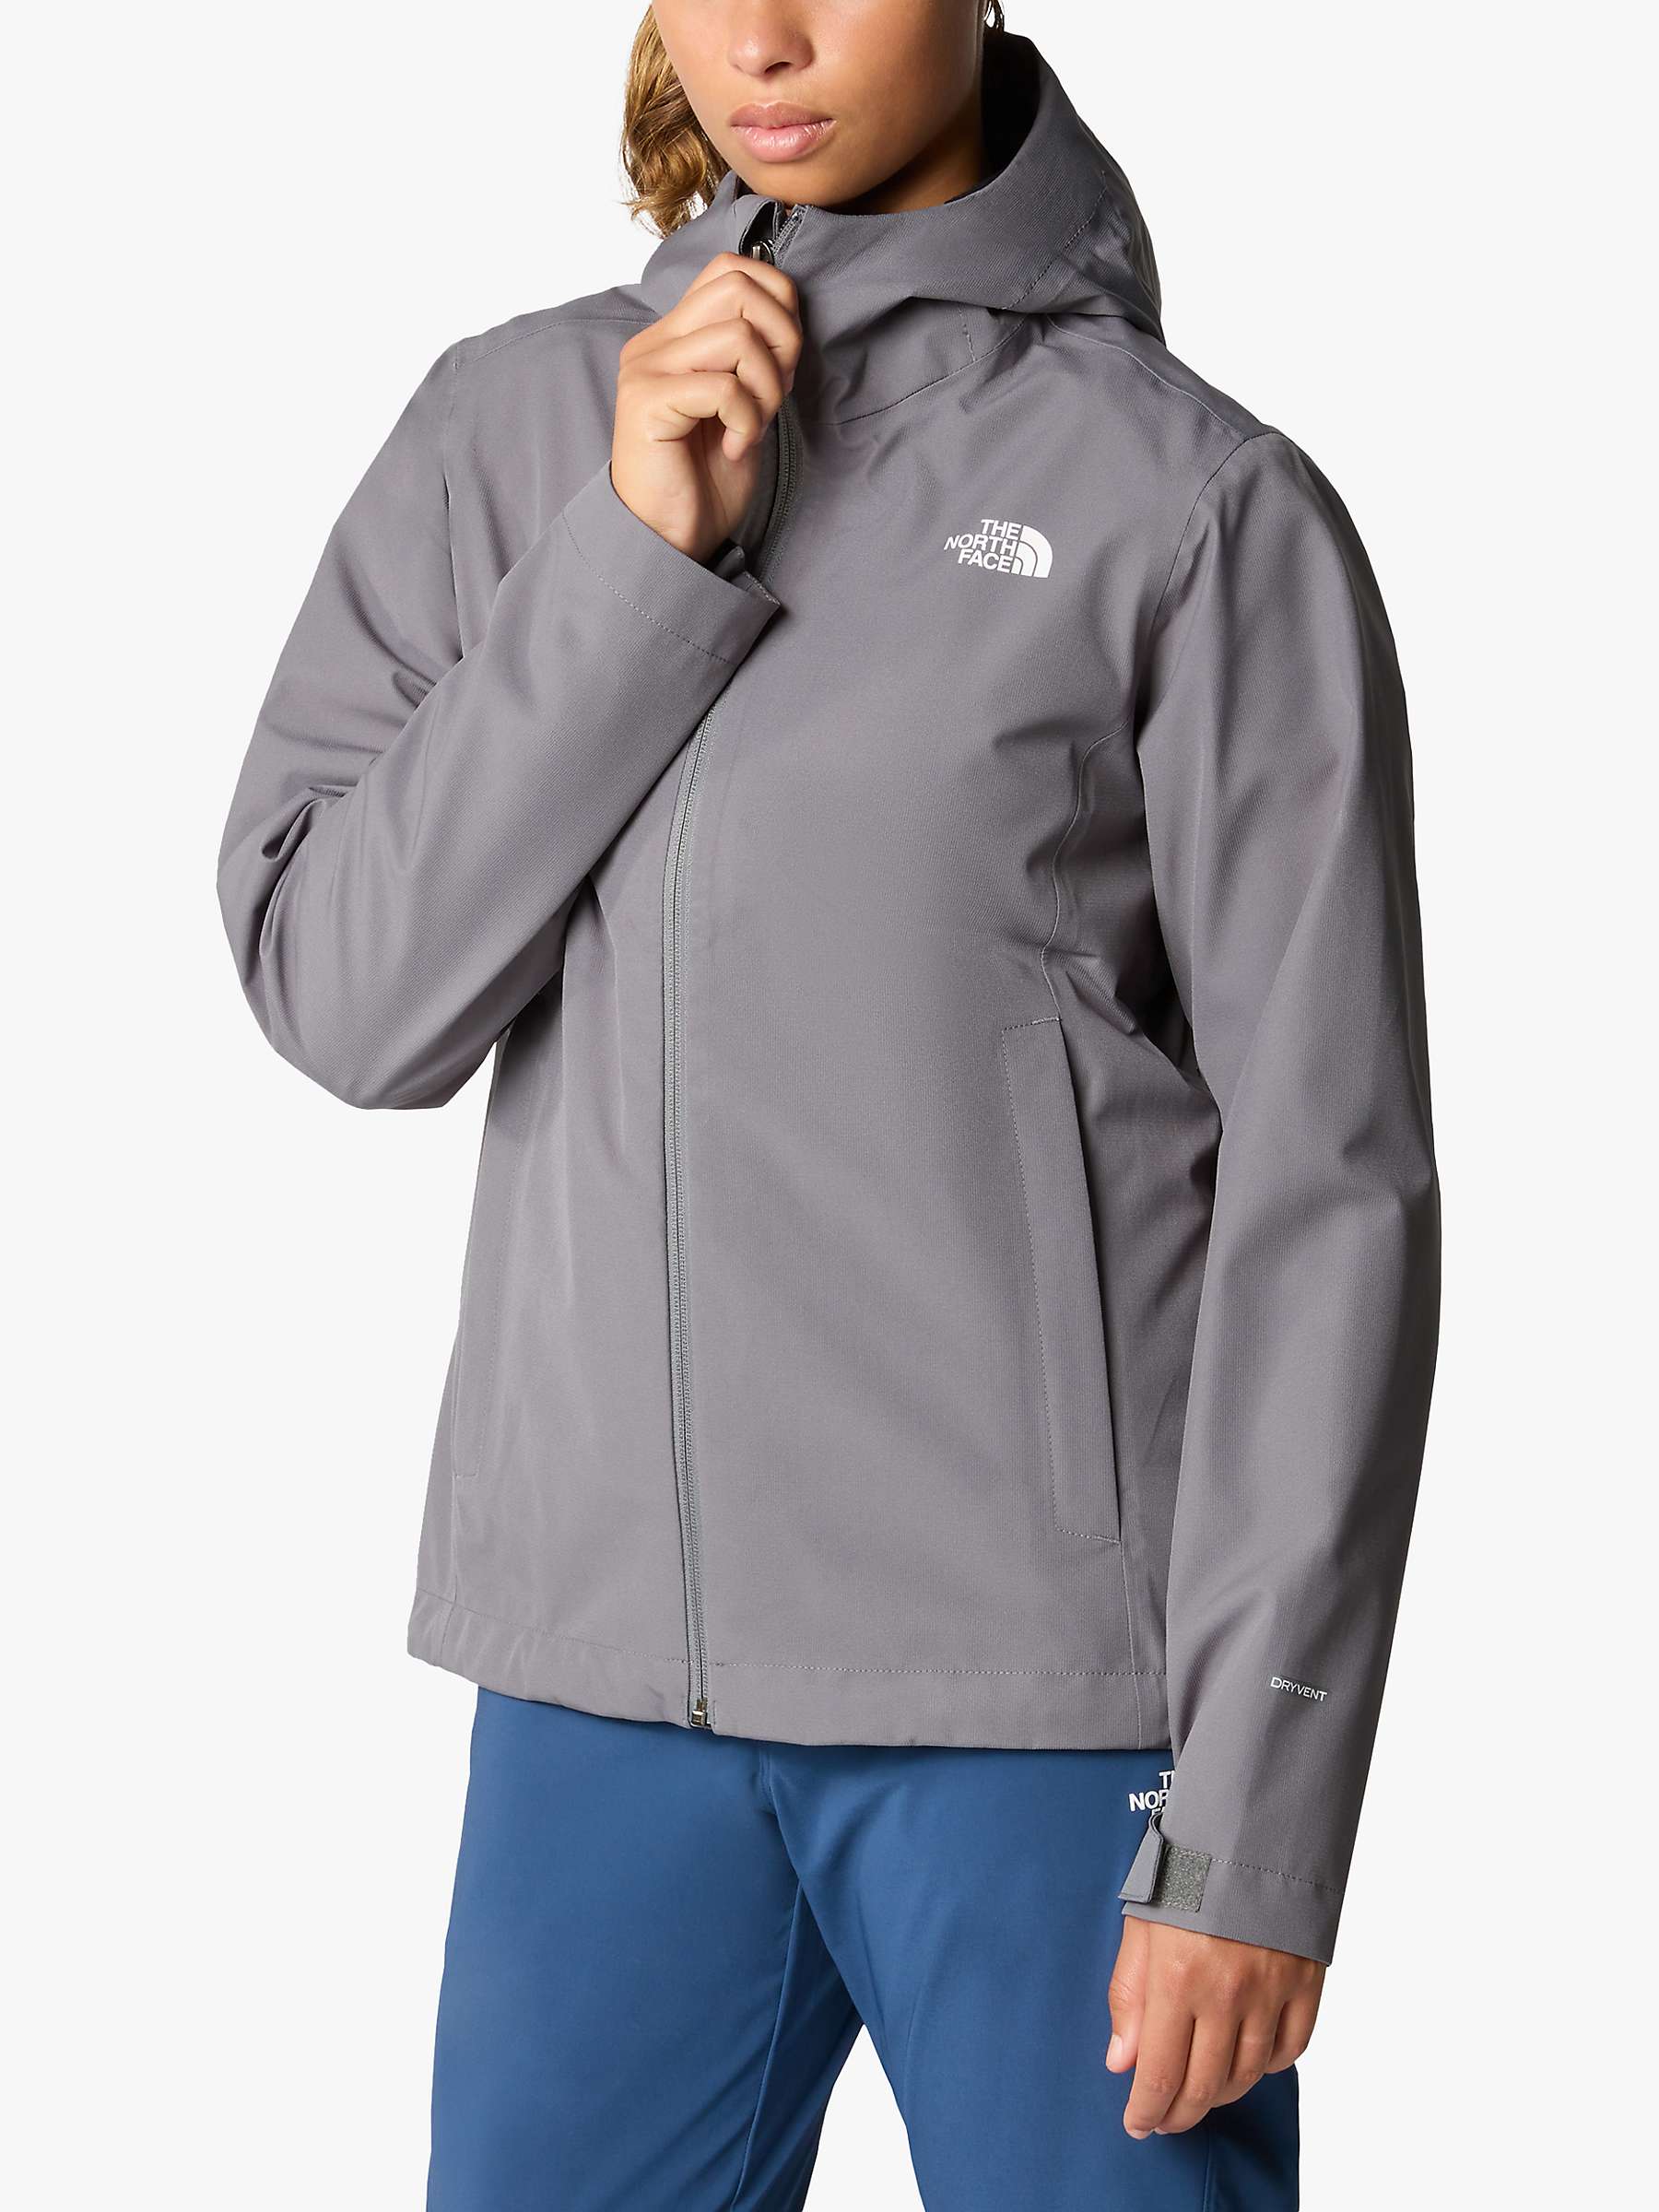 Buy The North Face Women's Whiton 3 Layer Jacket, Smoked Pearl Online at johnlewis.com